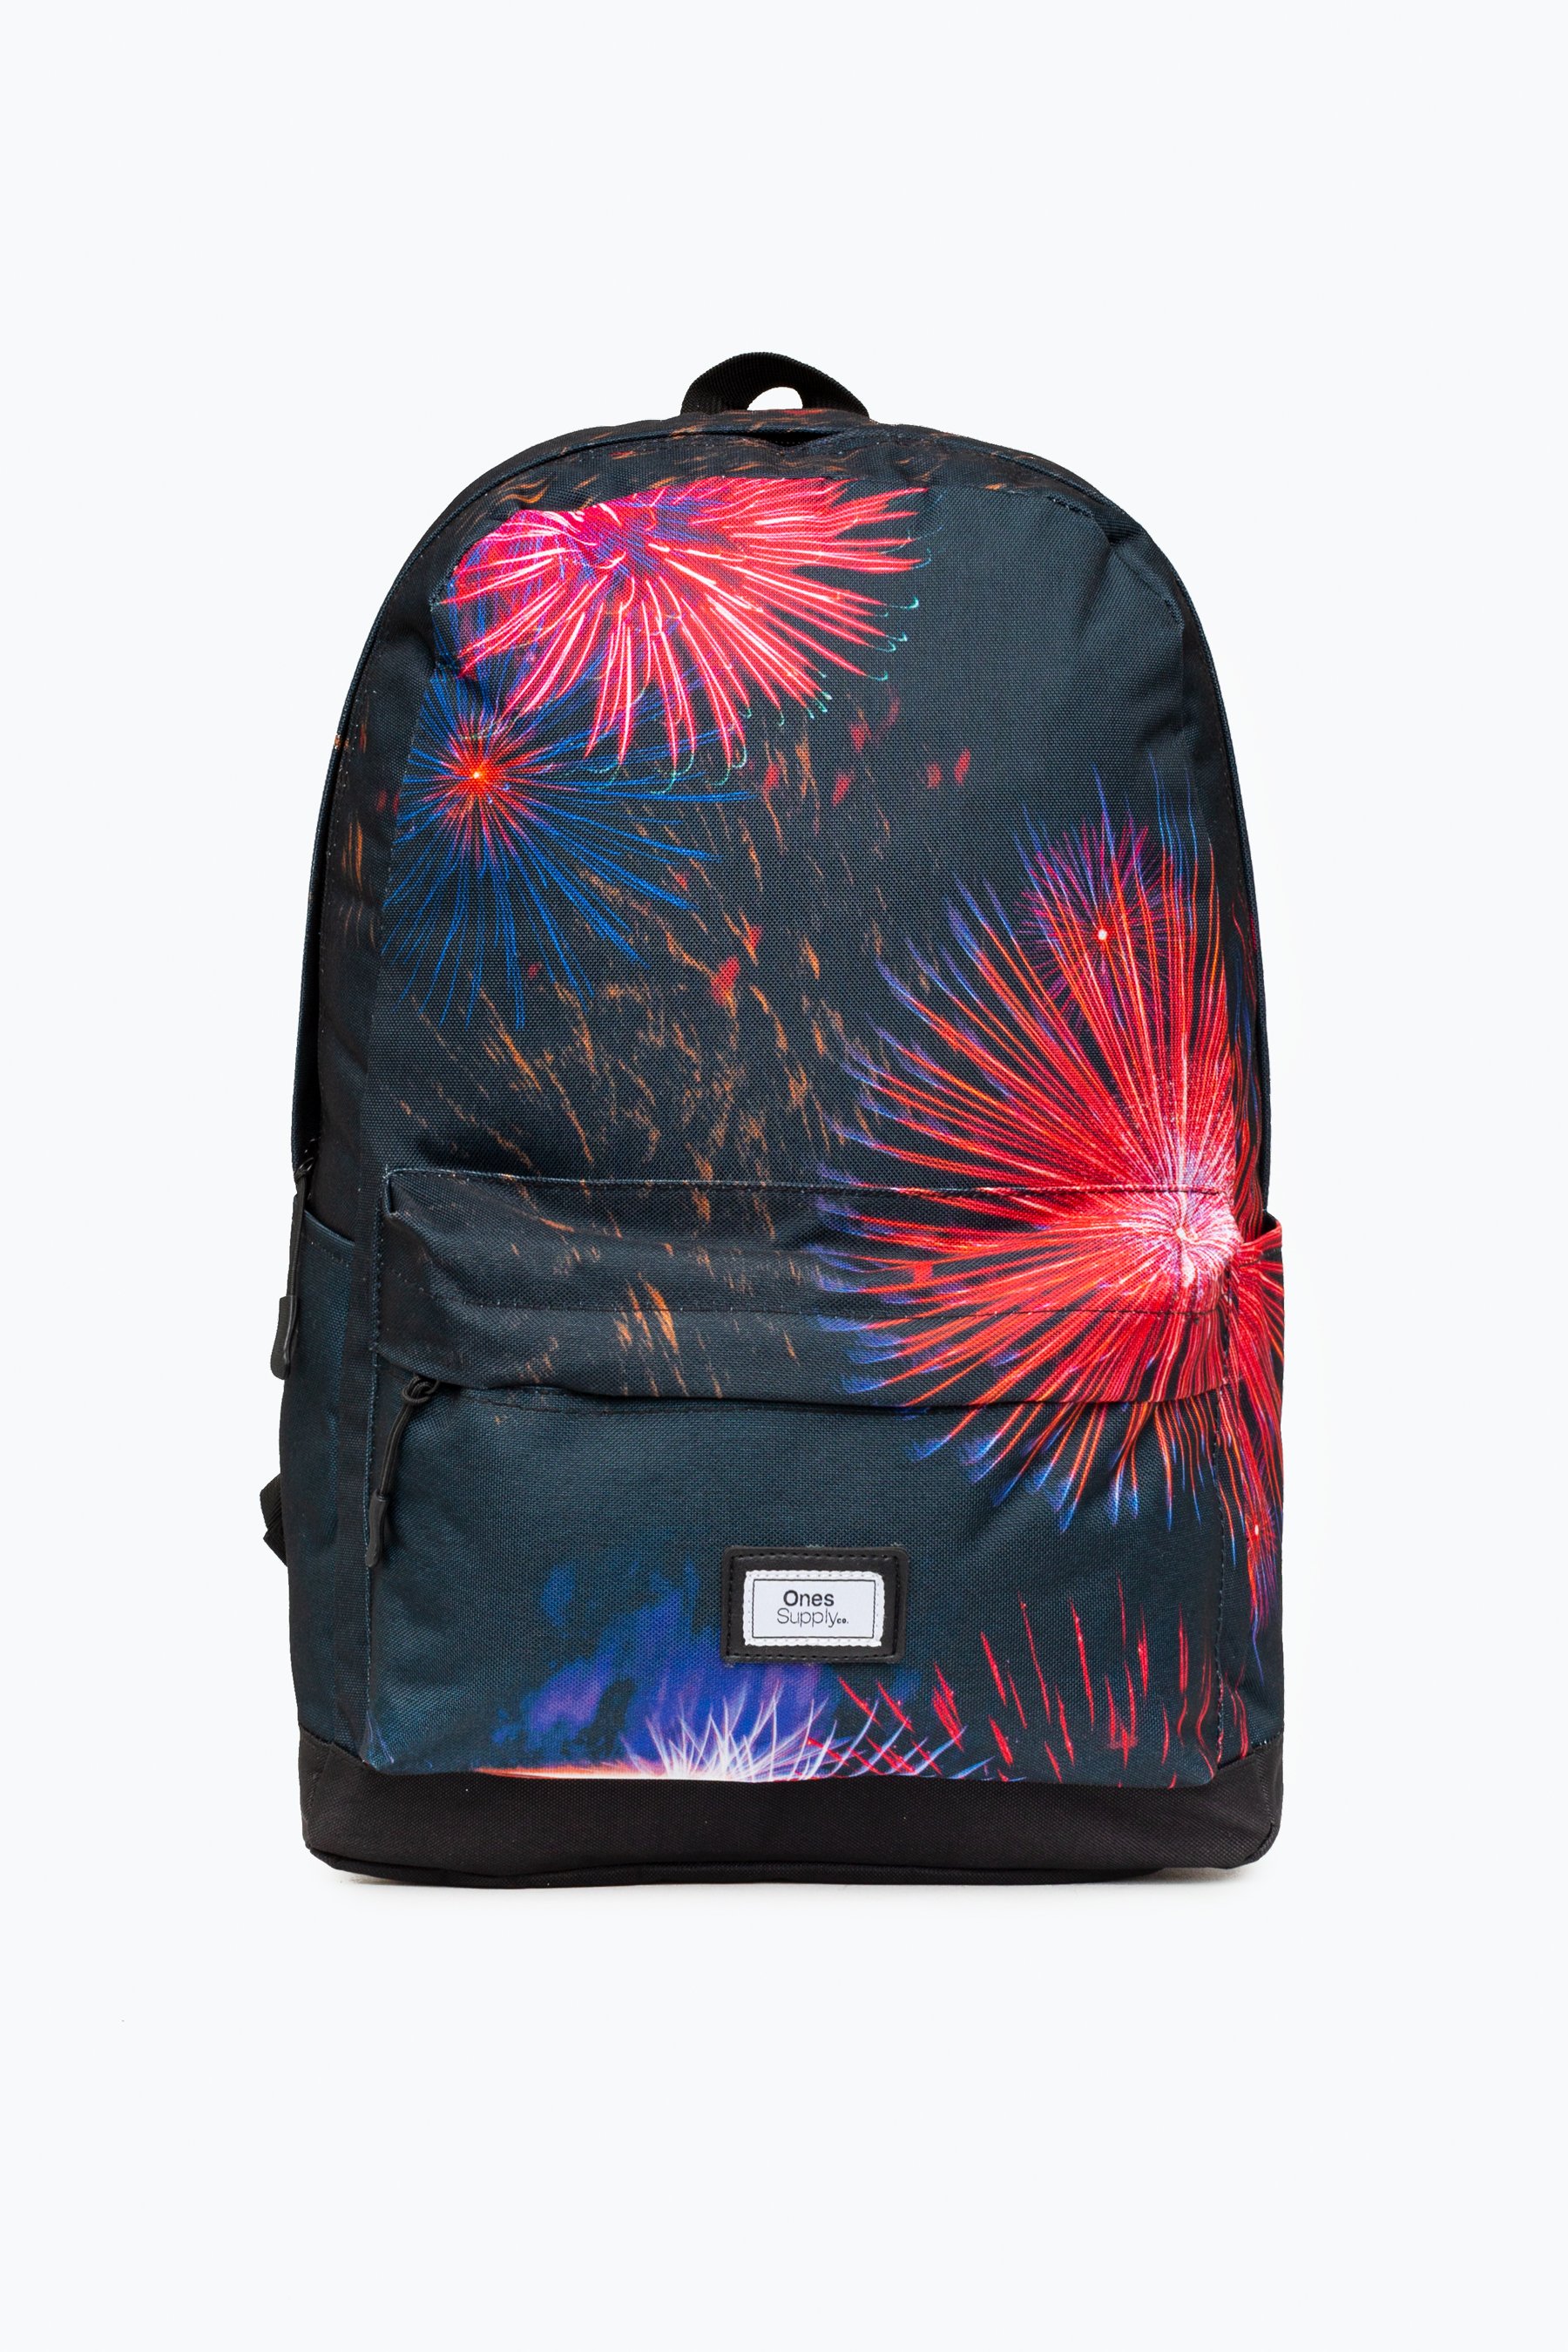 Hype Electric Fireworks Core Multi Backpack School Bag